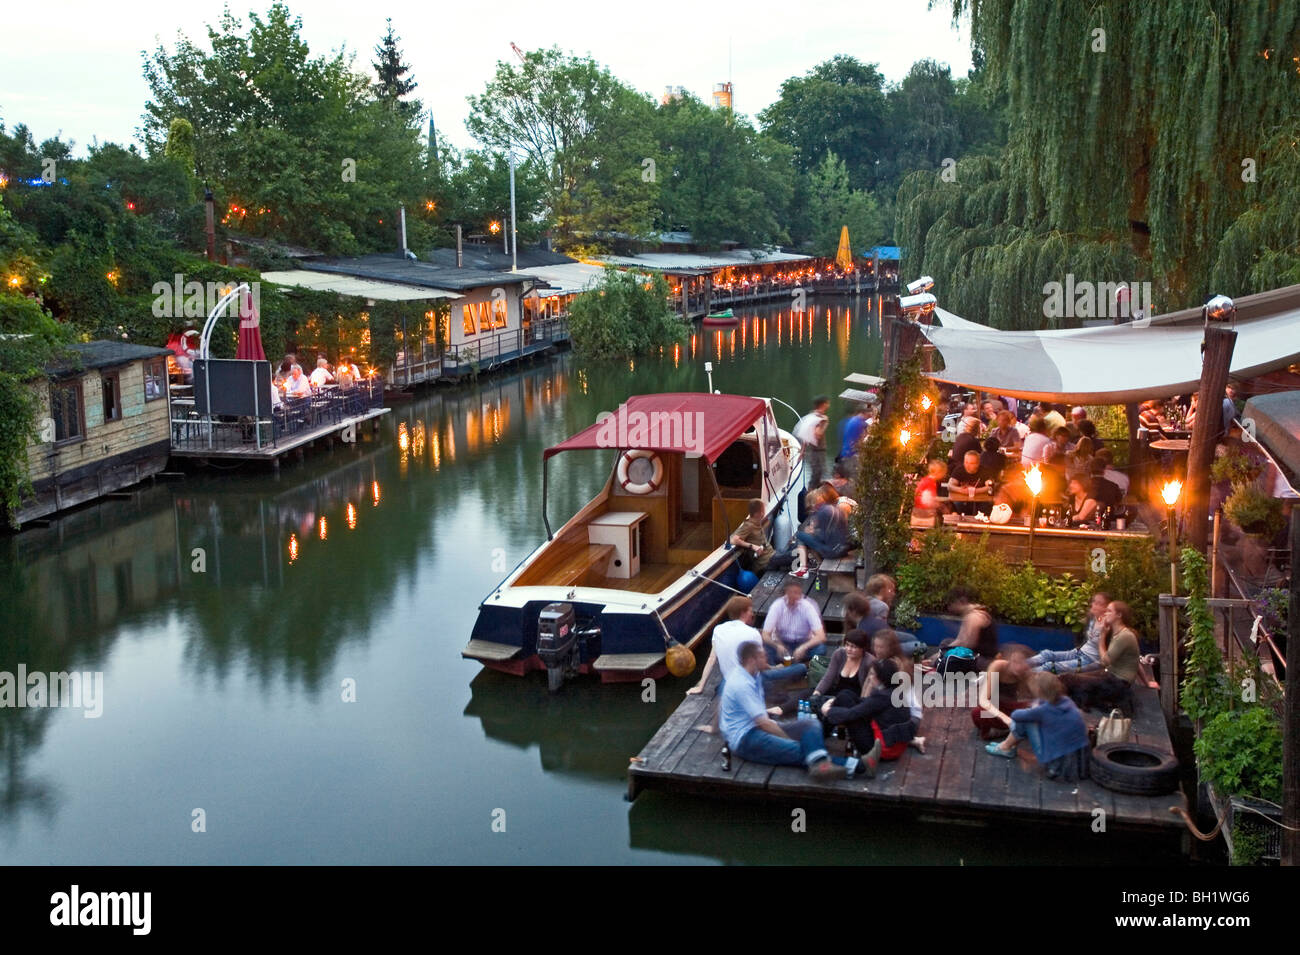 Club der Visionaere, restaurants, cafés, bars at Flutgraben in the evening, canal, Treptow, Berlin, Germany Stock Photo